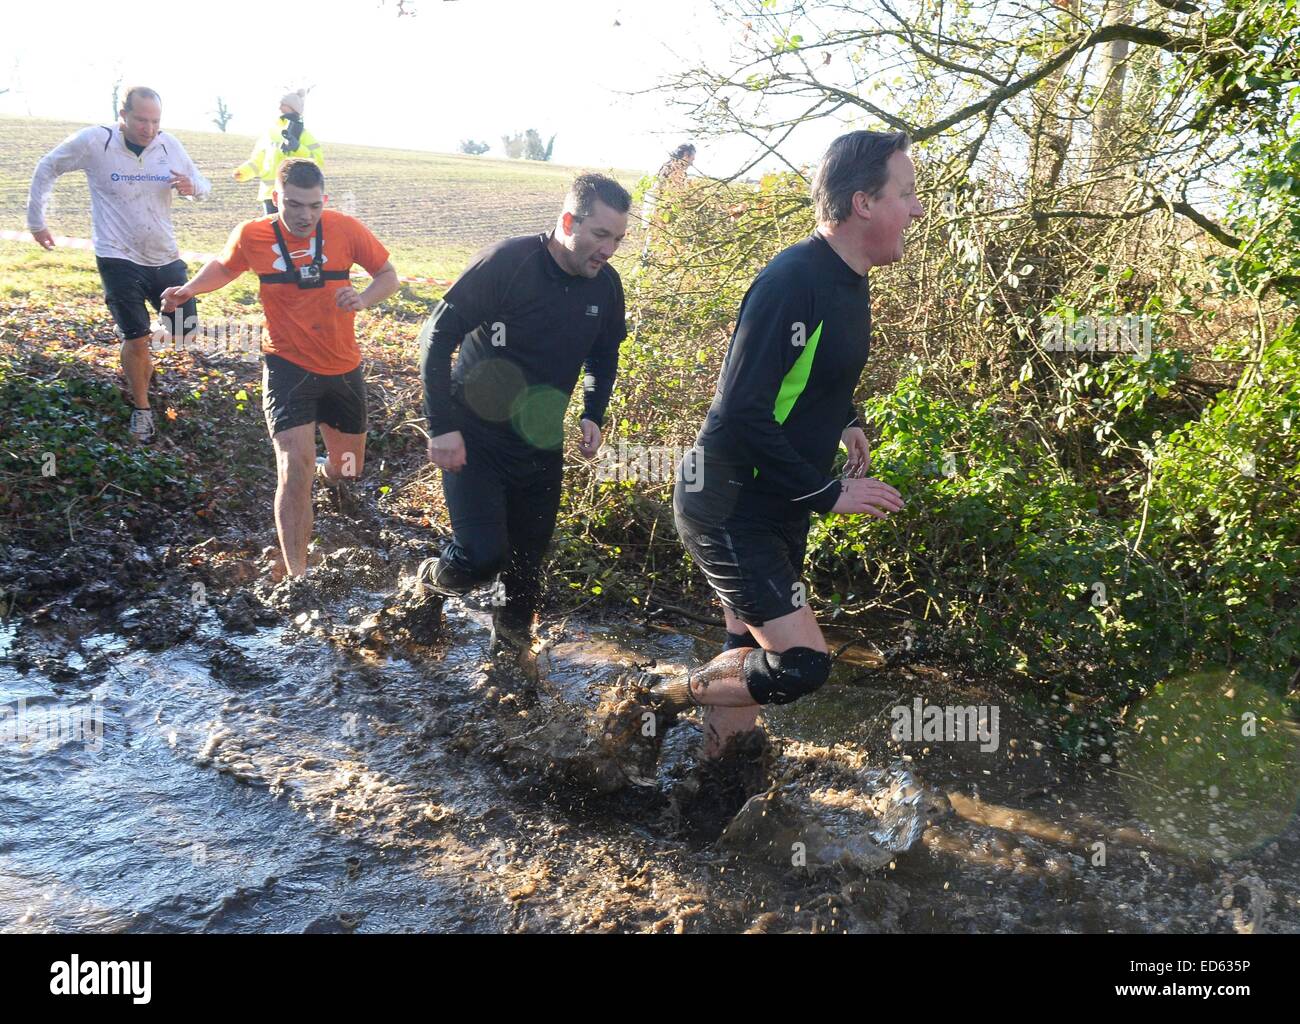 Chadlington, Oxfordshire, UK. 29th December, 2014. Prime Mininster David Cameron competes in The Great Brook Run which starts and finishes at The Tite Inn, Chadlington, Oxfordshire, UK.  Credit:  Denis Kennedy/Alamy Live News Stock Photo